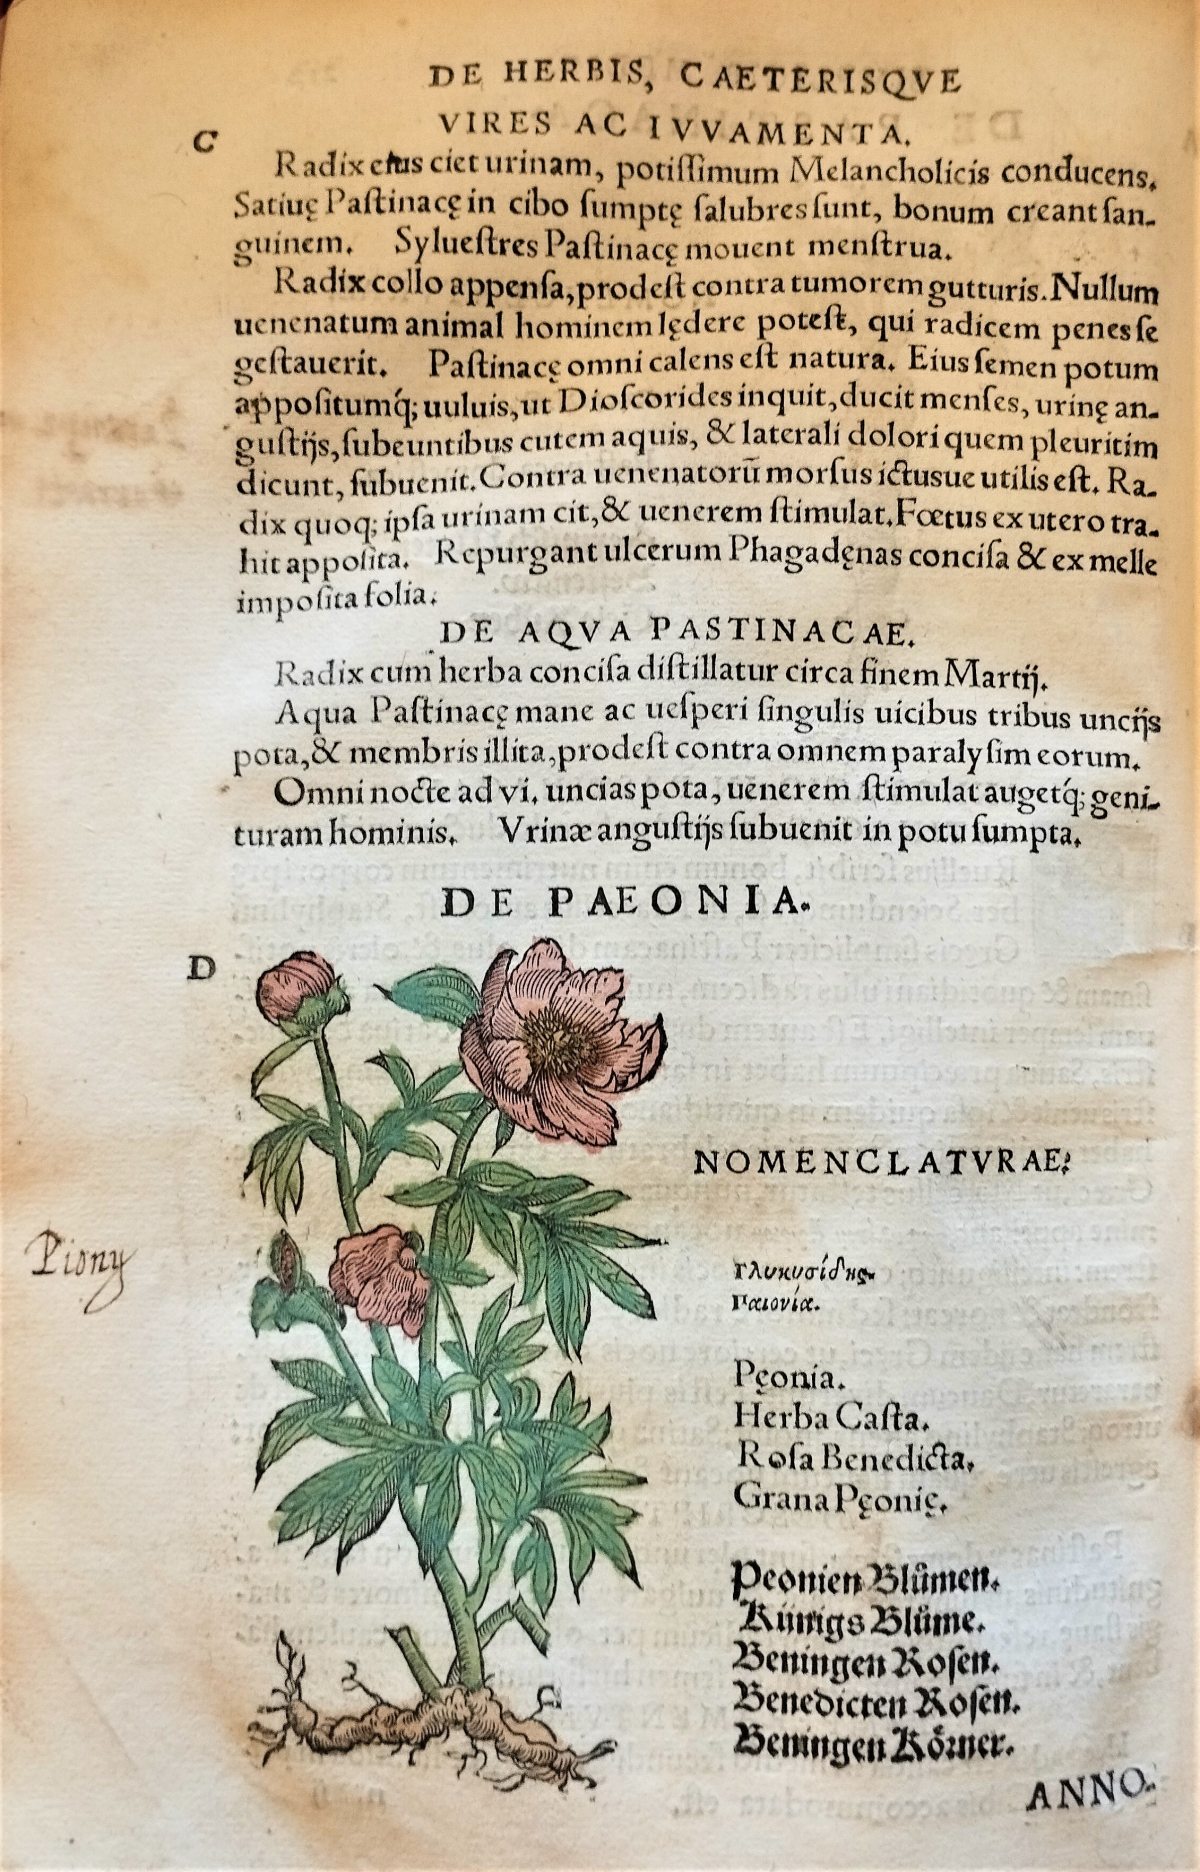 Page with the nomenclature, latin text description and hand painted illustration of the peony plant and flowers.